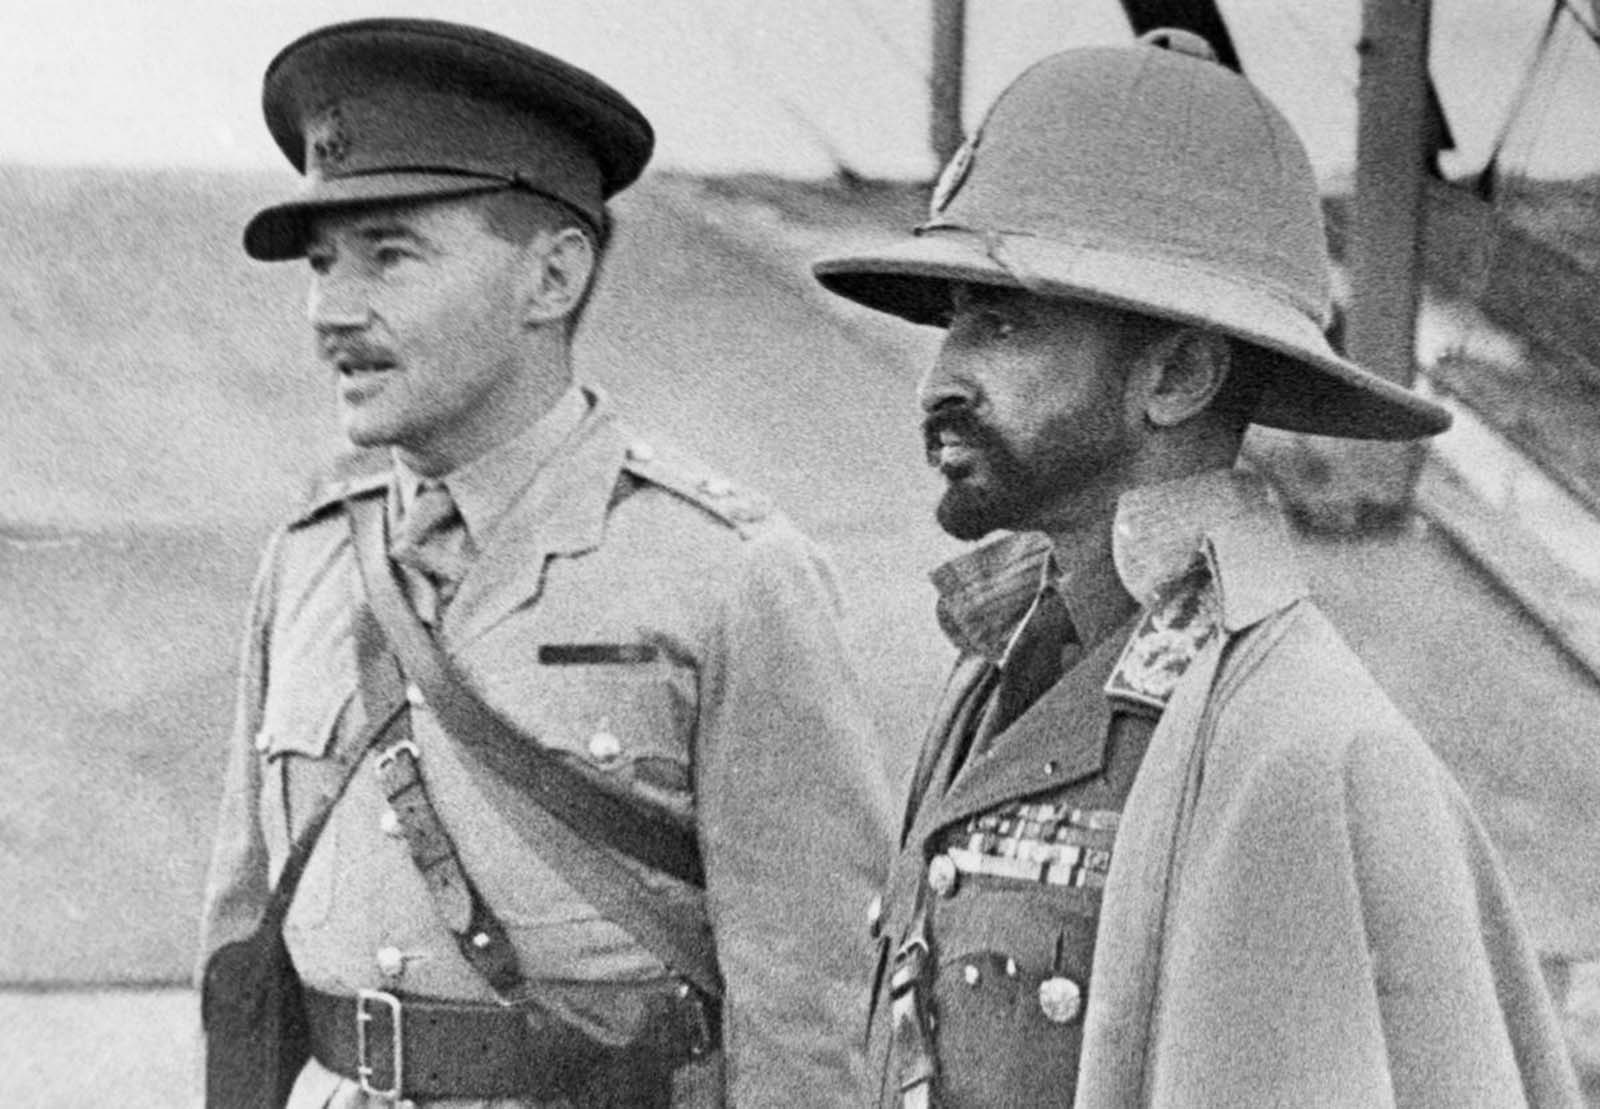 Haile Selassie (right), exiled Emperor of Ethiopia, whose empire was absorbed by Italy, returns with an Ethiopian army recruited to aid the British in Africa, on February 19, 1941. Here, the emperor inspects an airport, an interpreter at his side. On May 5, 1941, after the Italians in Ethiopia were defeated by Allied troops, Selassie returned to Addis Ababa, and resumed his position as ruler.